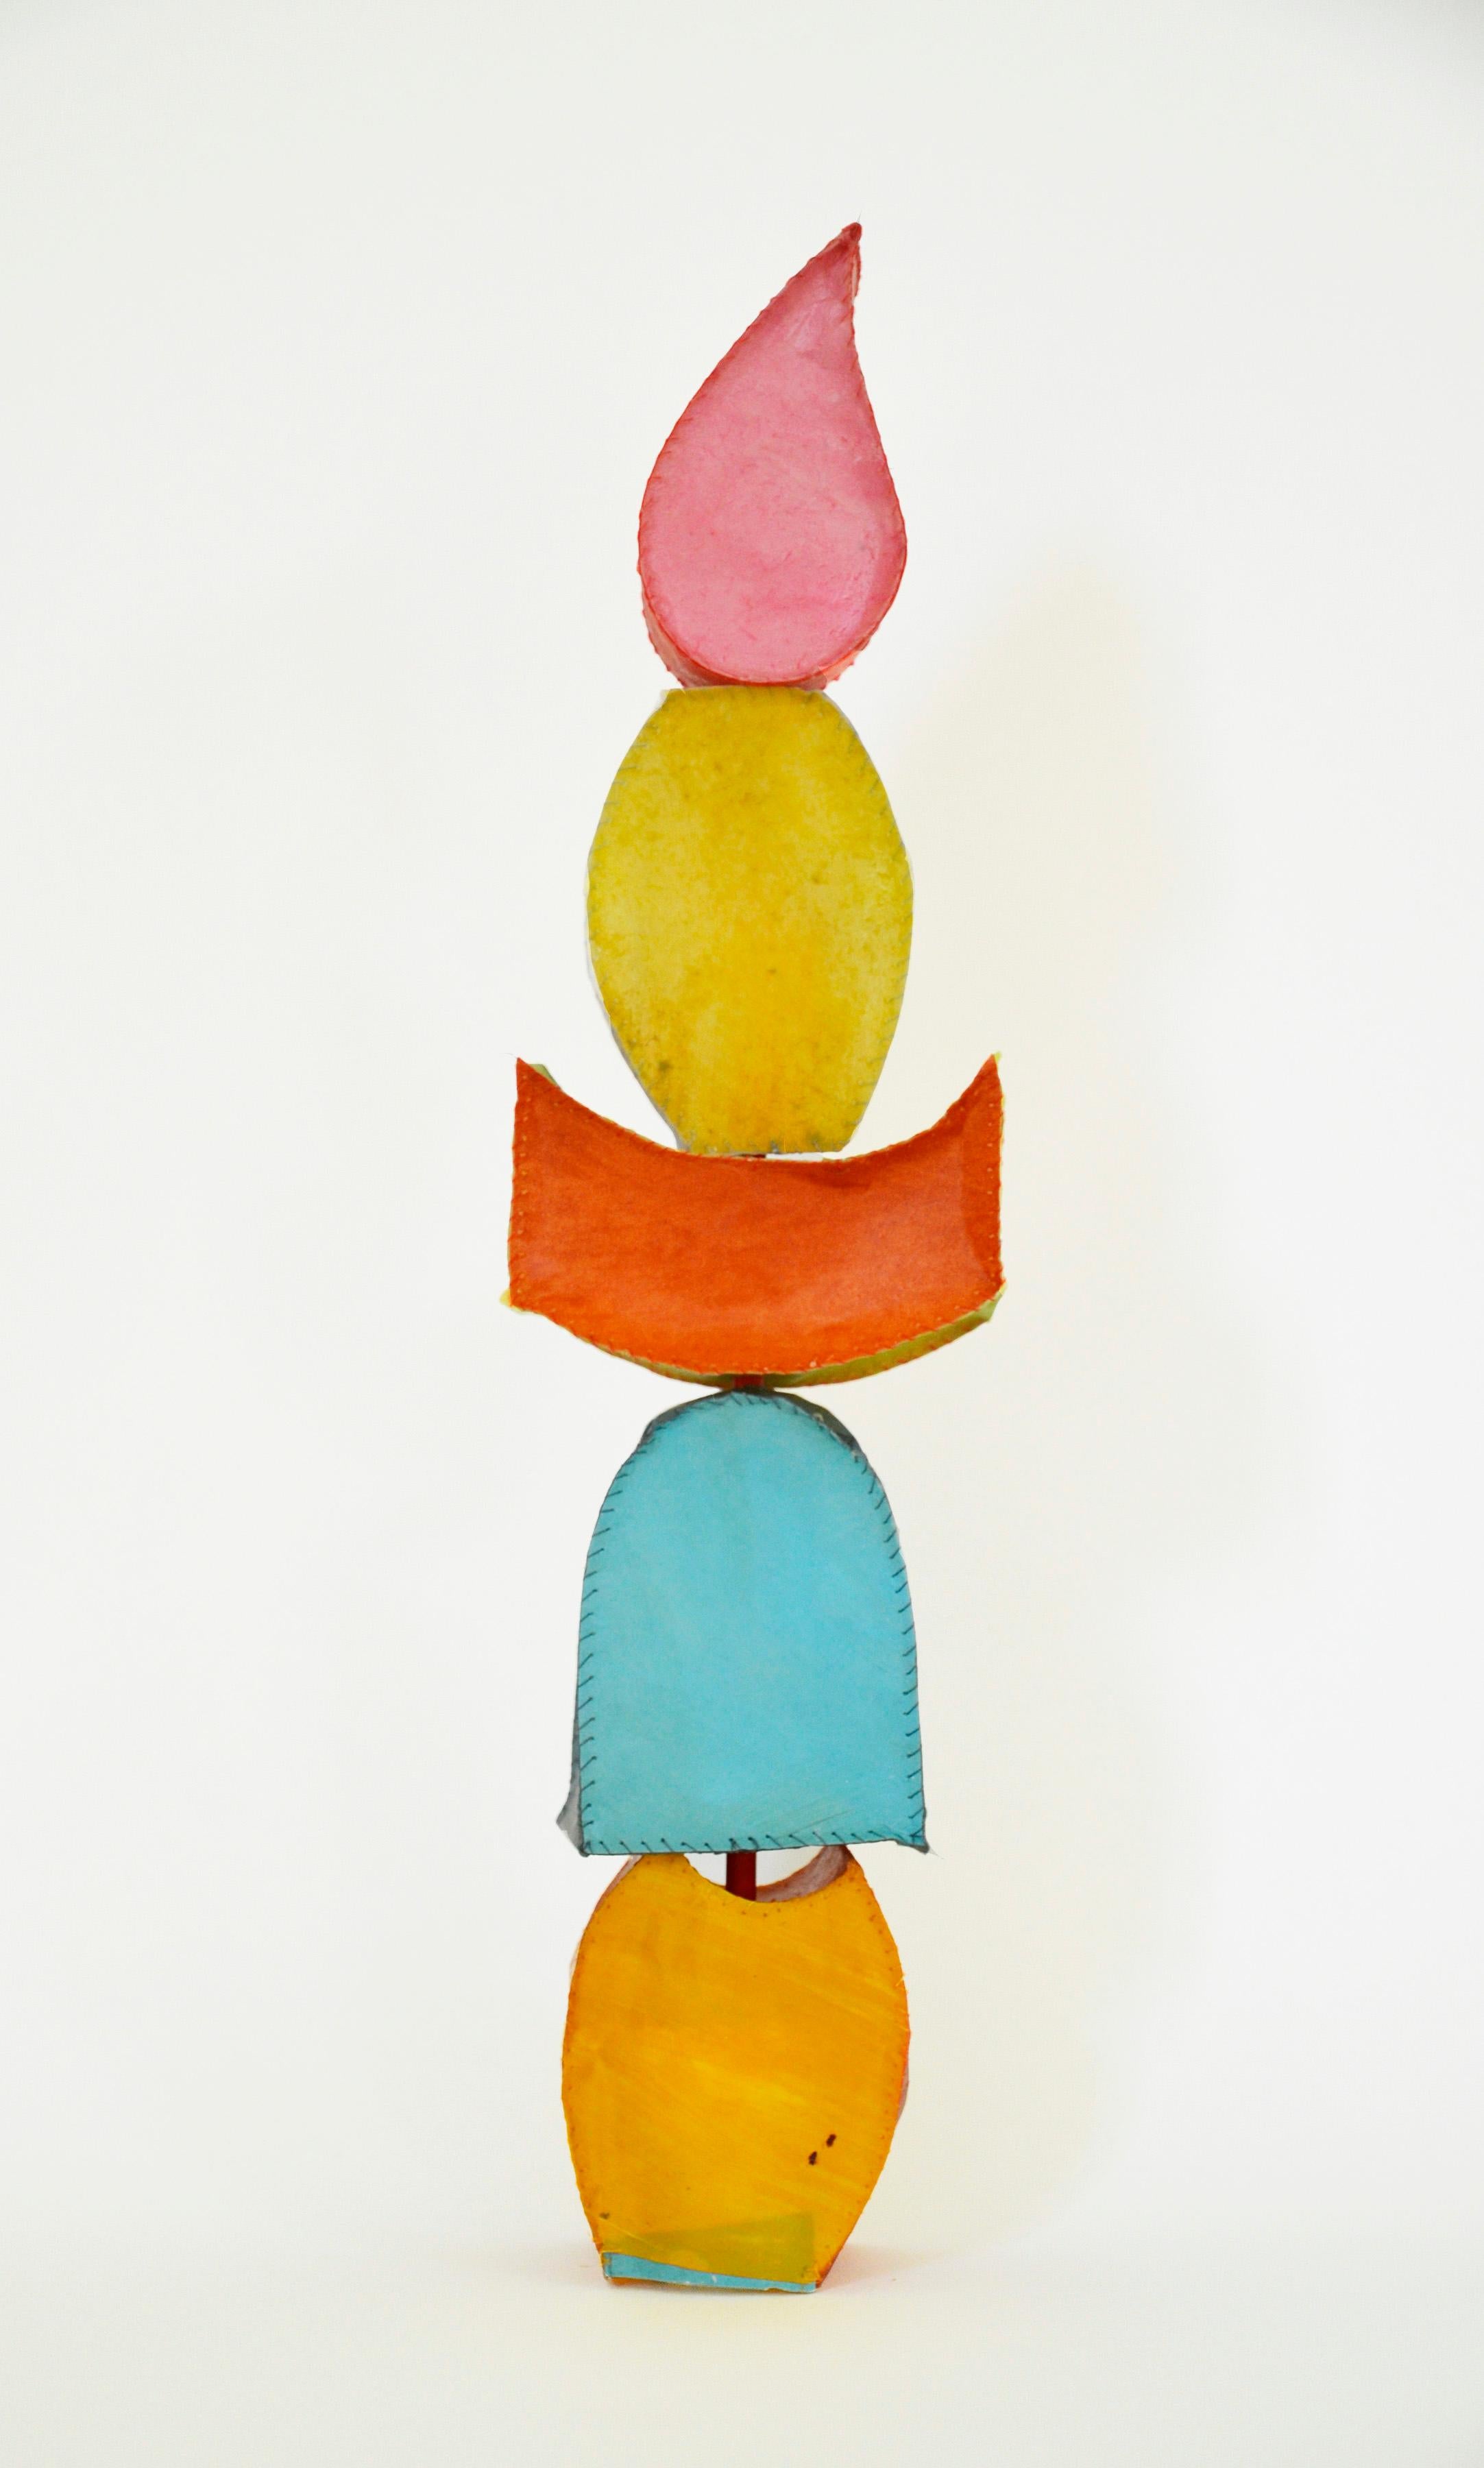 Play Tower #9 (Colorful Abstract Standing Sculpture in Sky Blue, Pink & Orange)